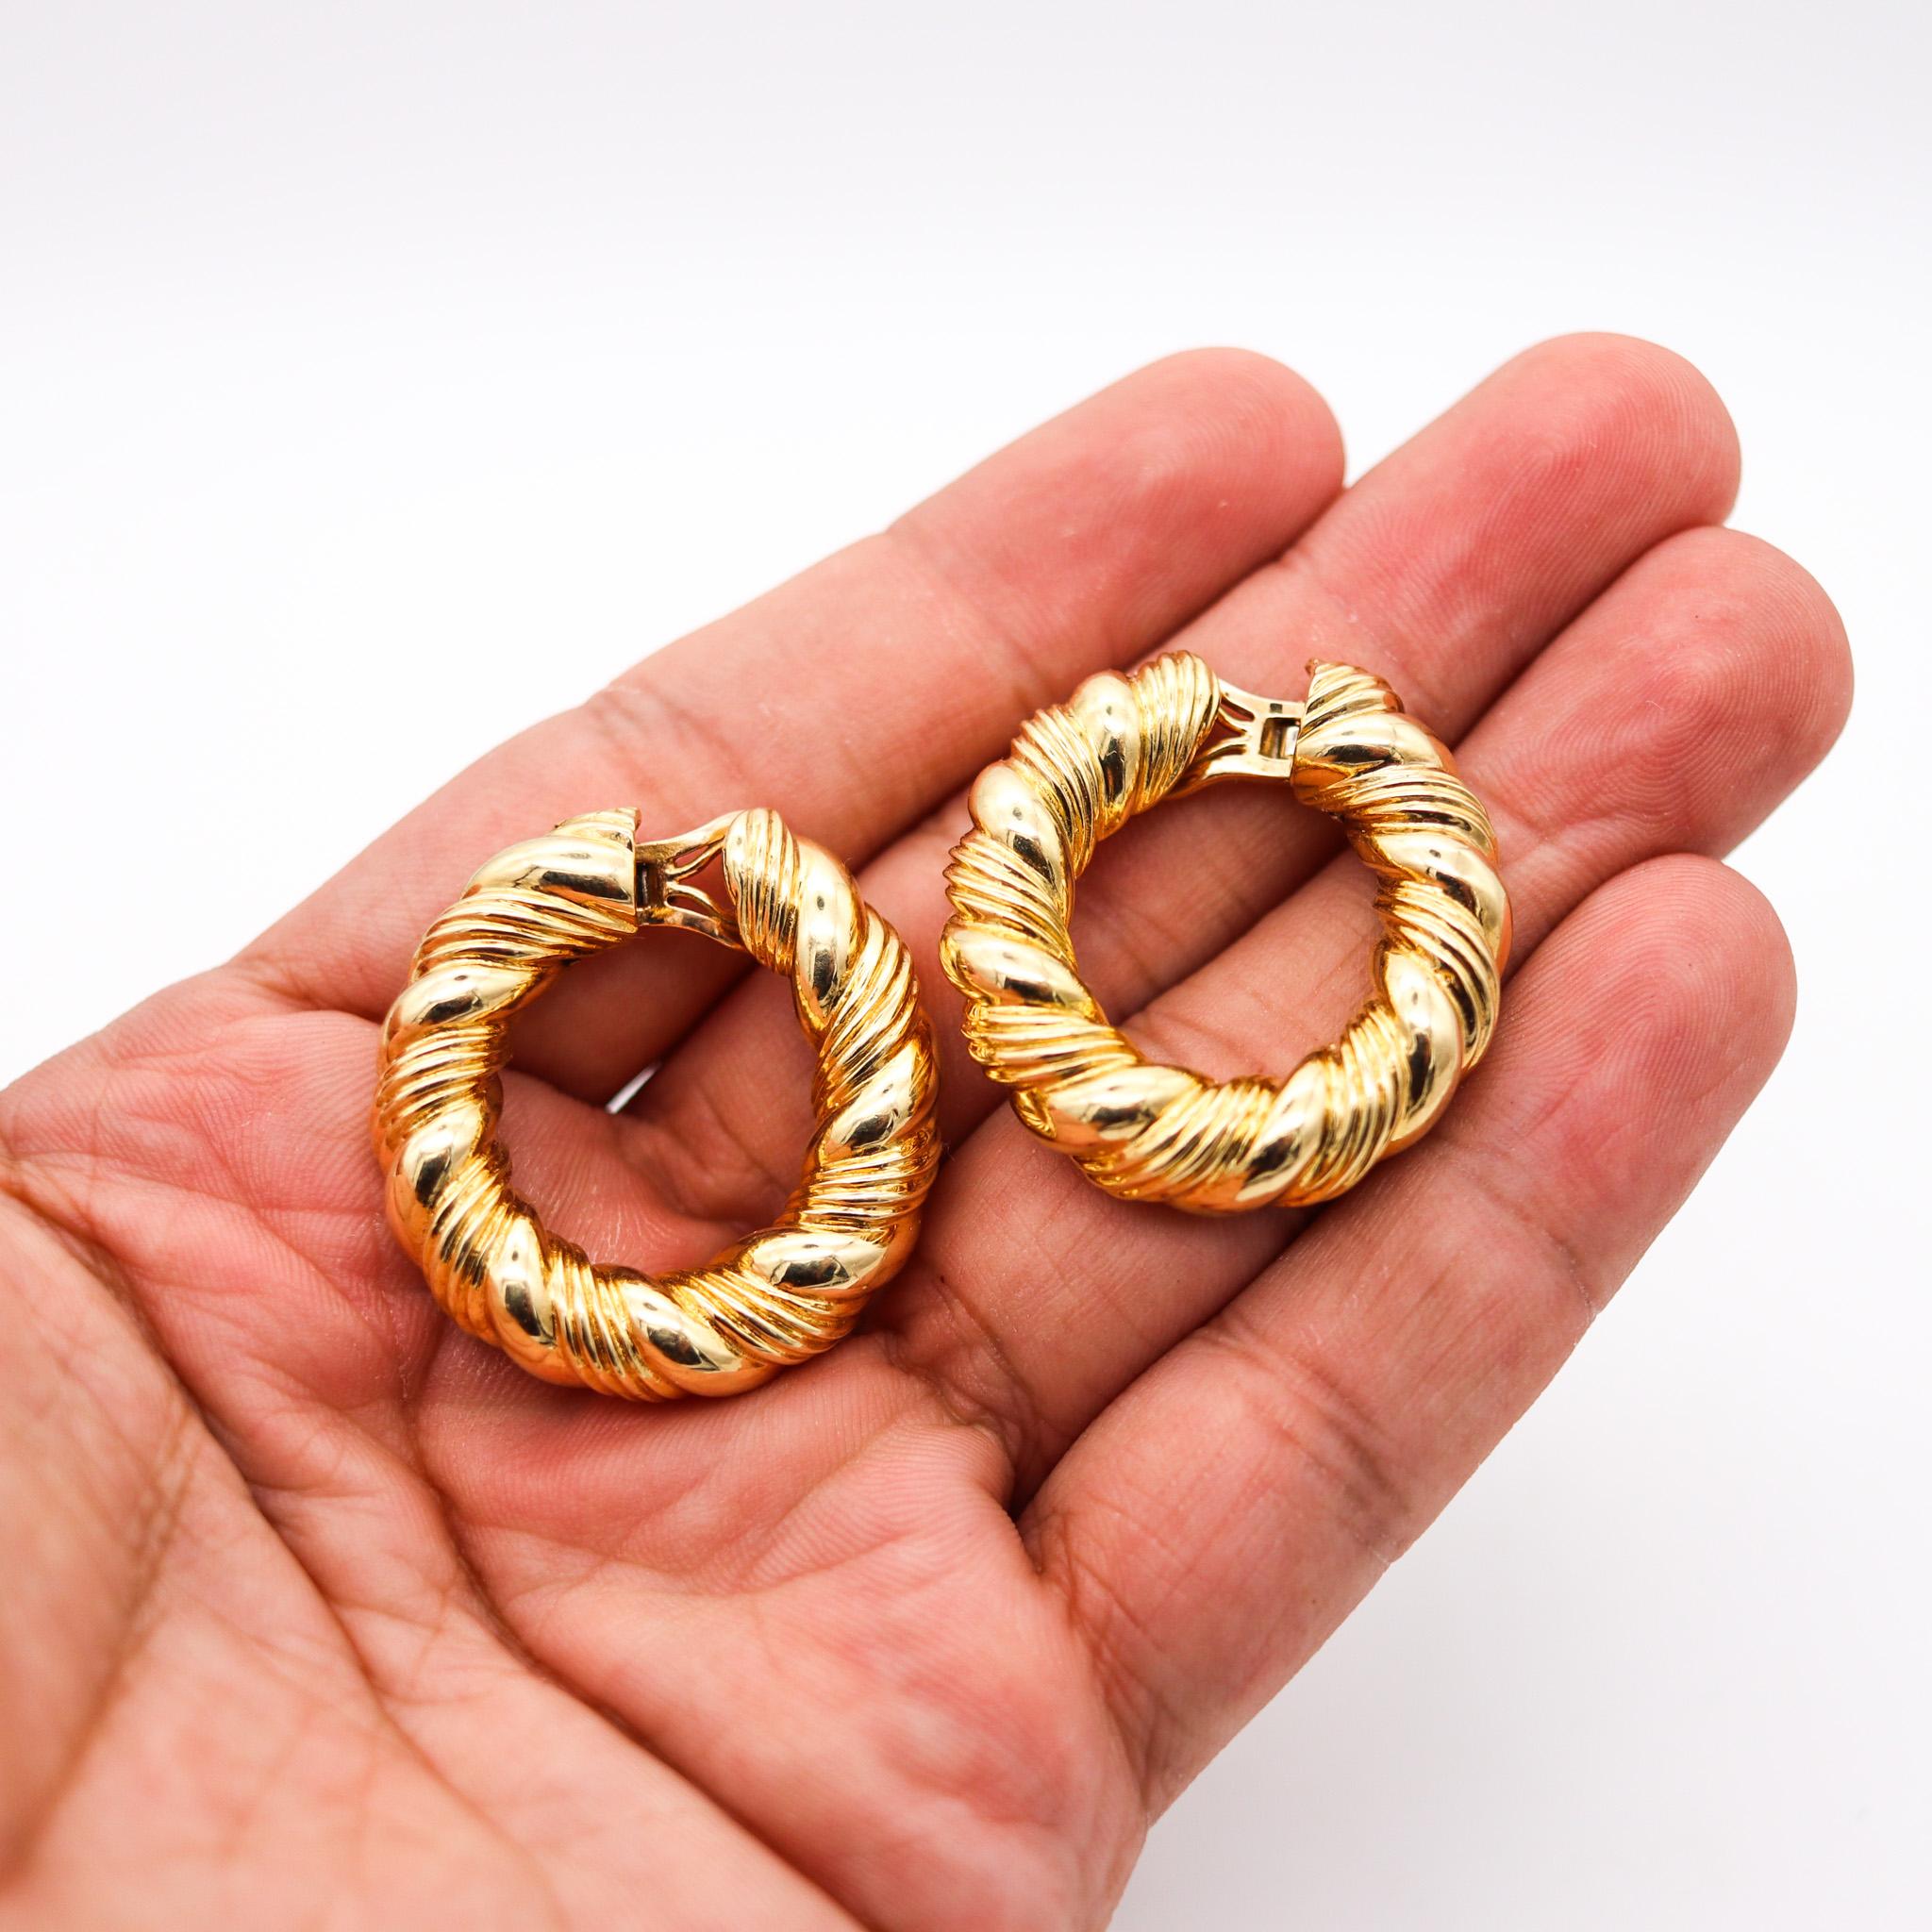 Van Cleef & Arpels 1969 Paris By Andre Vassort Hoops Clips Earrings In 18Kt Gold In Excellent Condition For Sale In Miami, FL